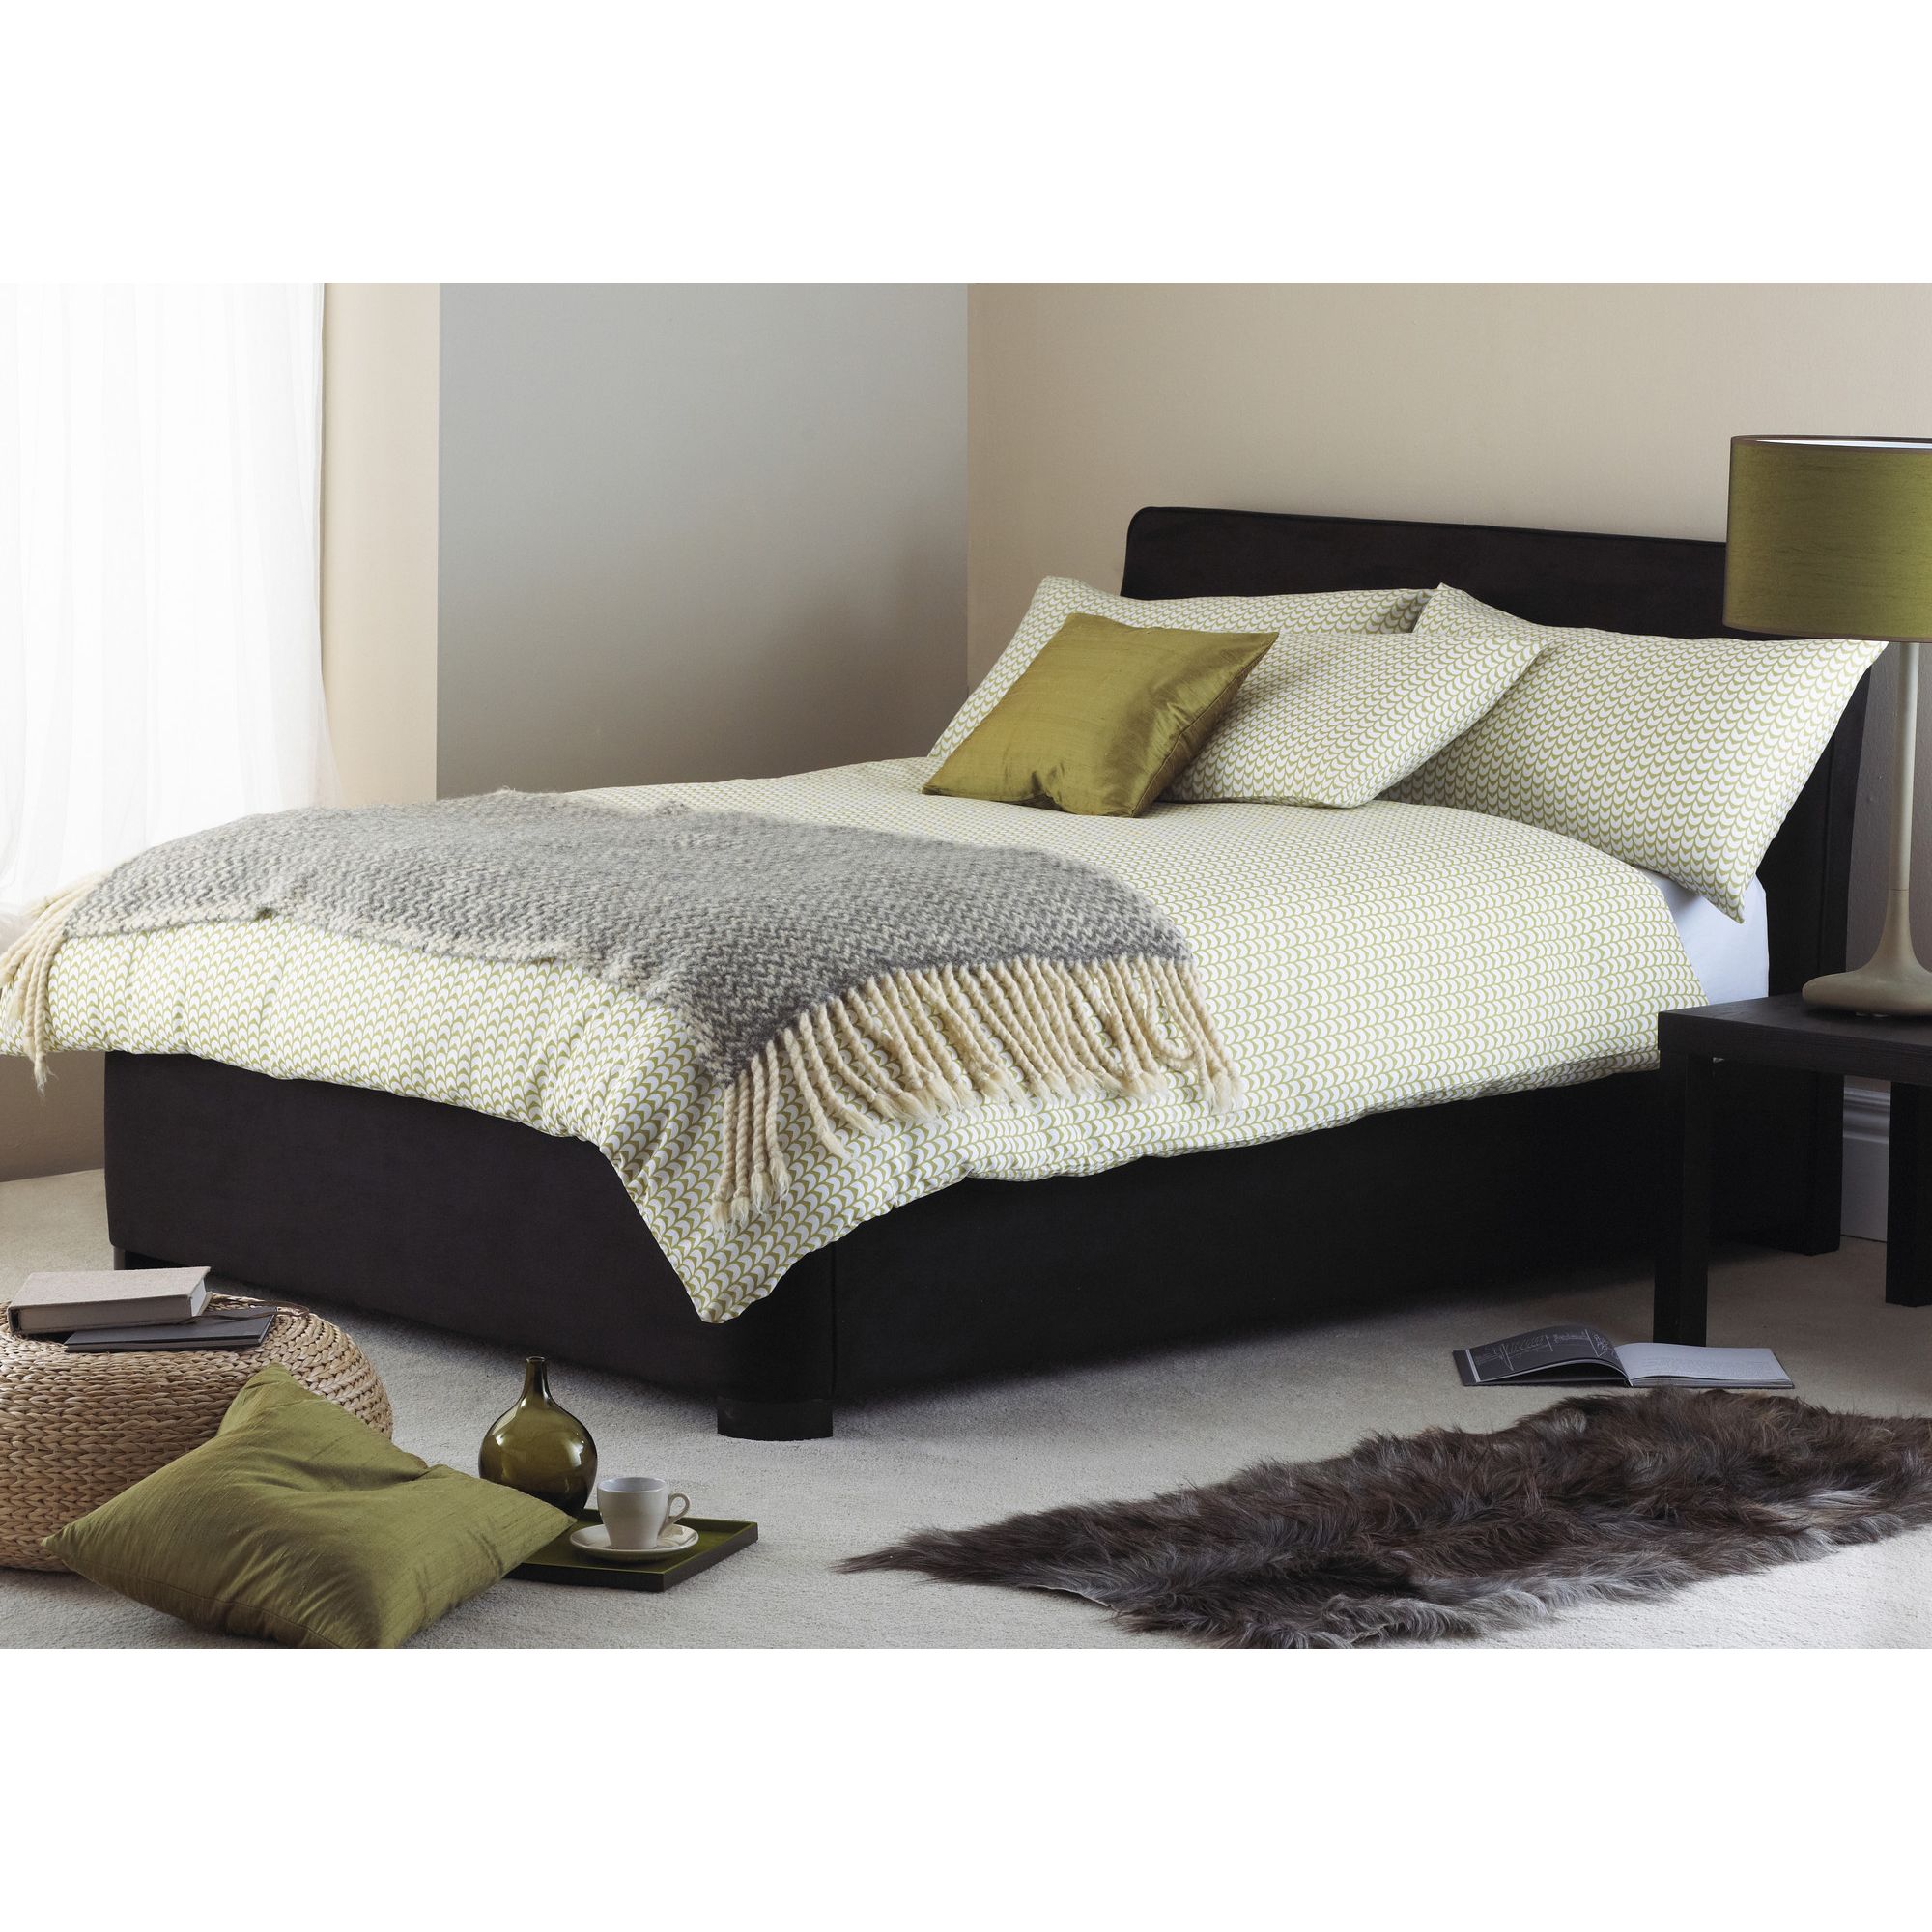 Hyder Paris Suede Ottoman Bed - Double at Tesco Direct